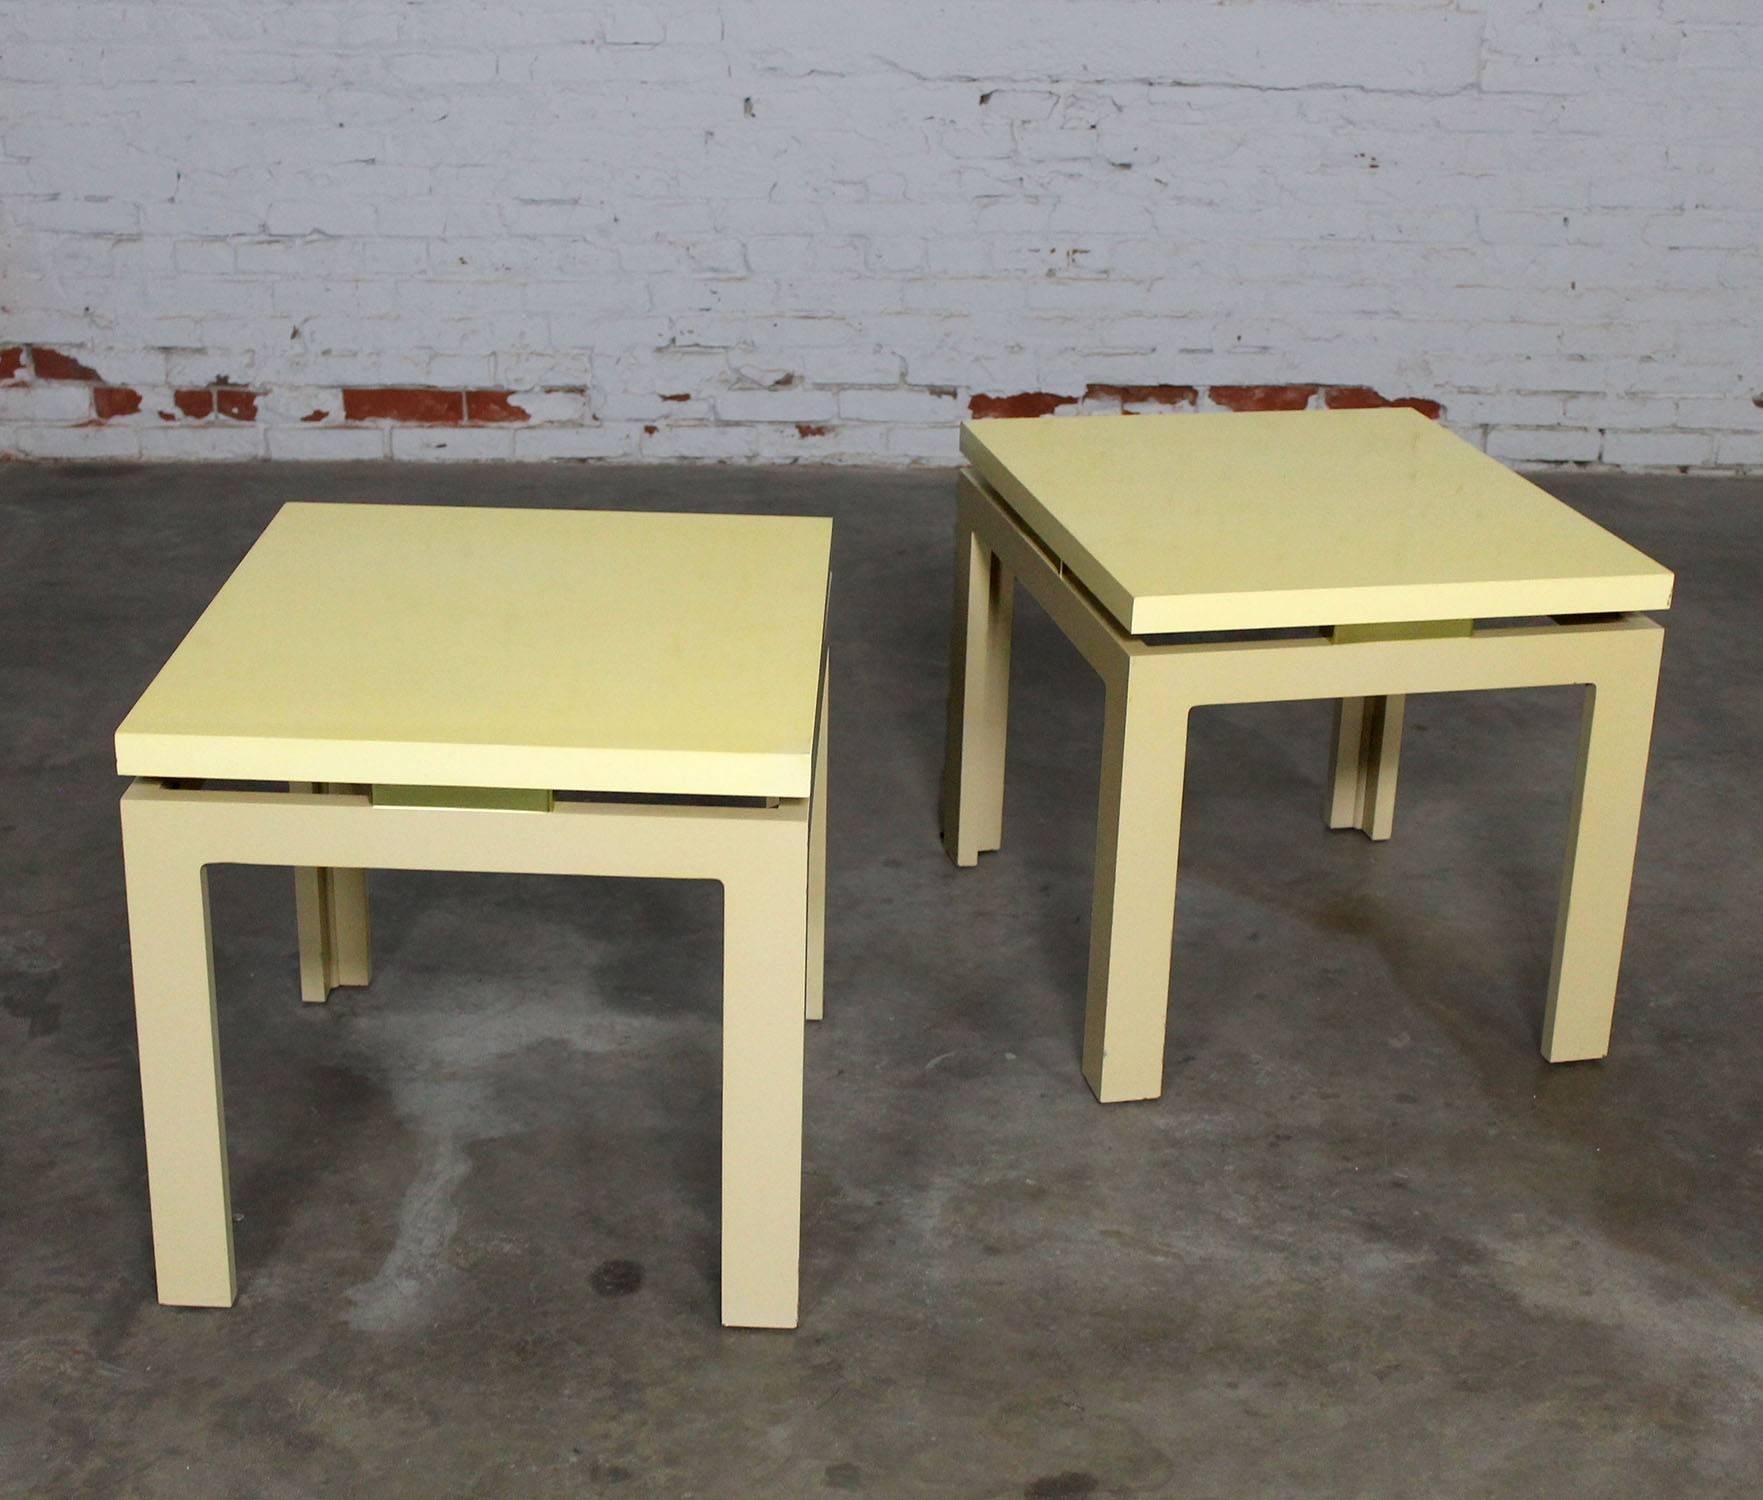 Awesome pair of off-white lacquered Parsons side tables with brass spacer detail and floating top. They are rectangular and in wonderful vintage 1970s condition. There are small nicks and dings to the lacquer but nothing major to detract from their